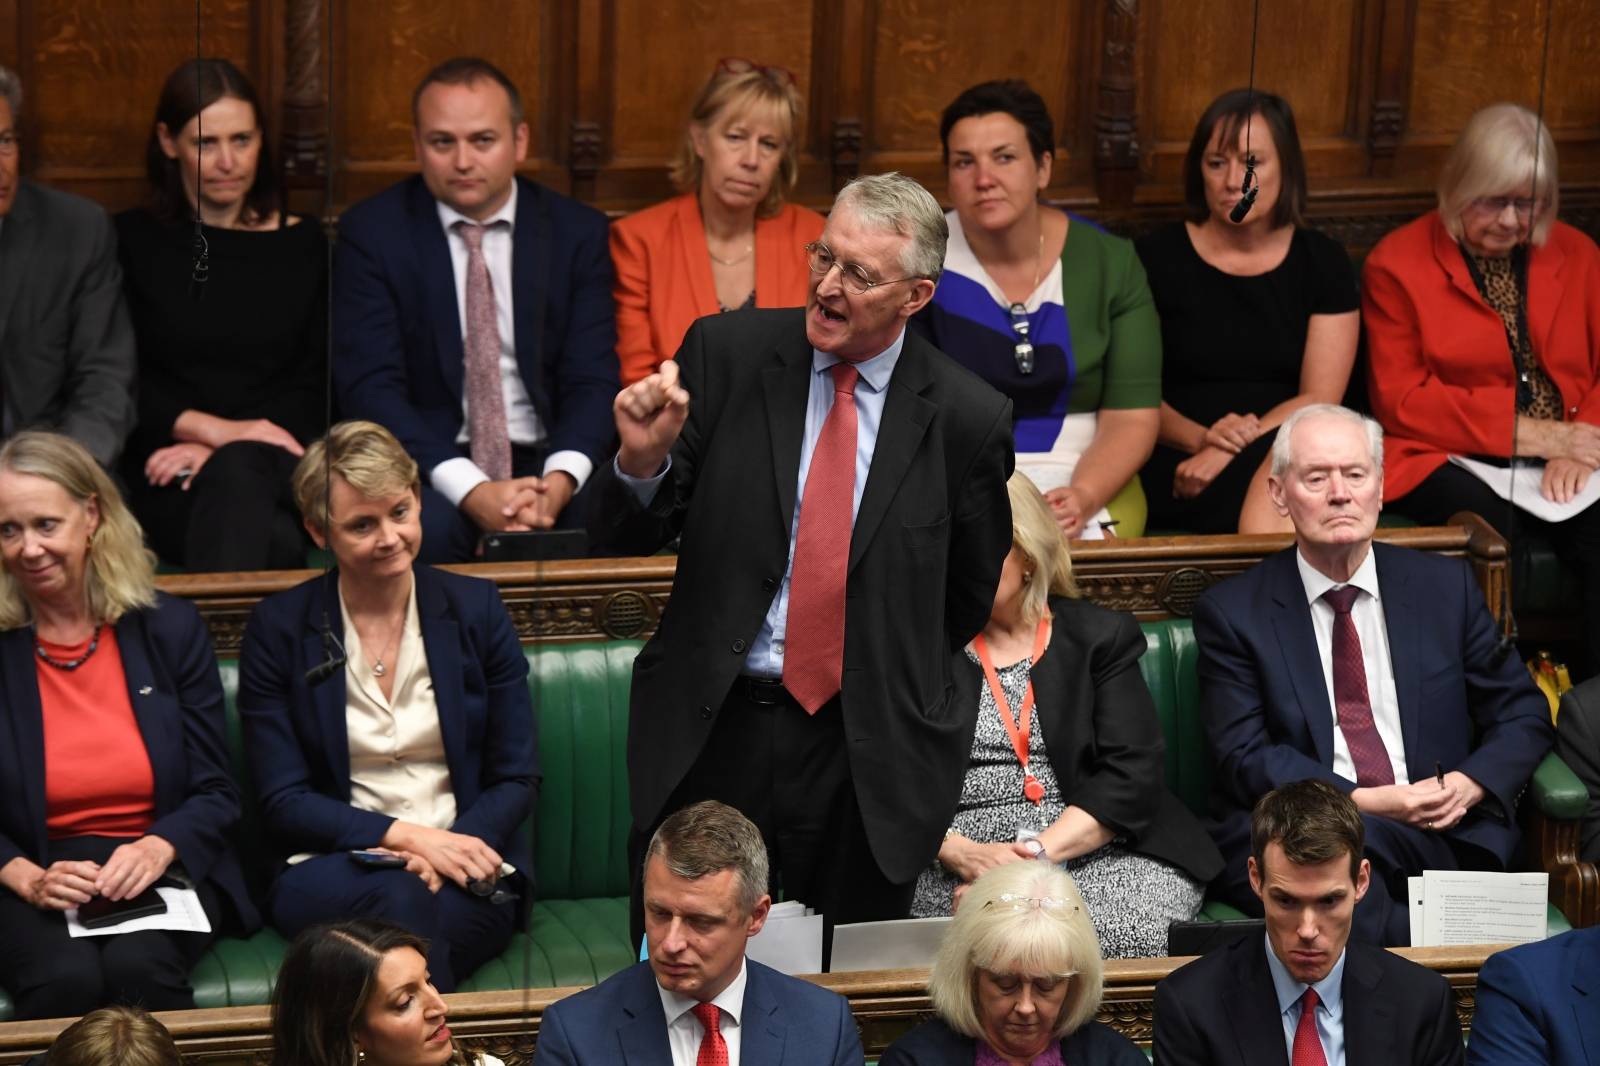 British Labour Party politician Hilary Benn speaks after Speaker John Bercow delivered a statement in the House of Commons in London